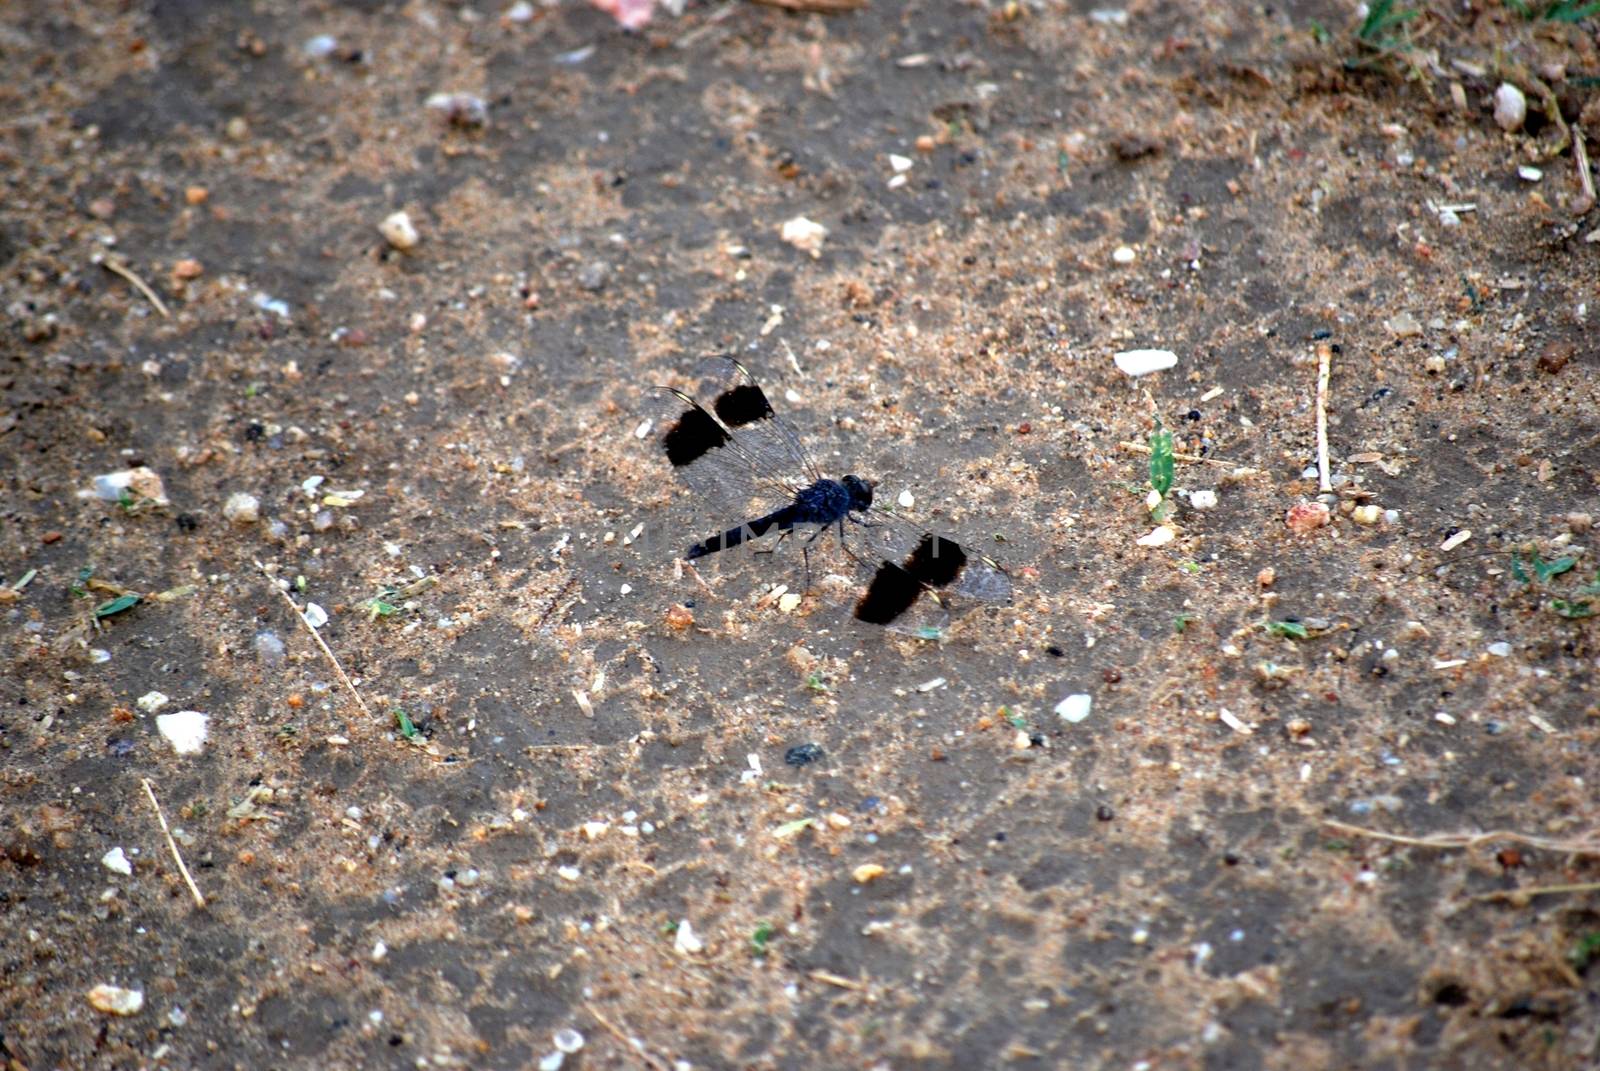 Dragonfly black and blue on the ground of a Tanzanian park